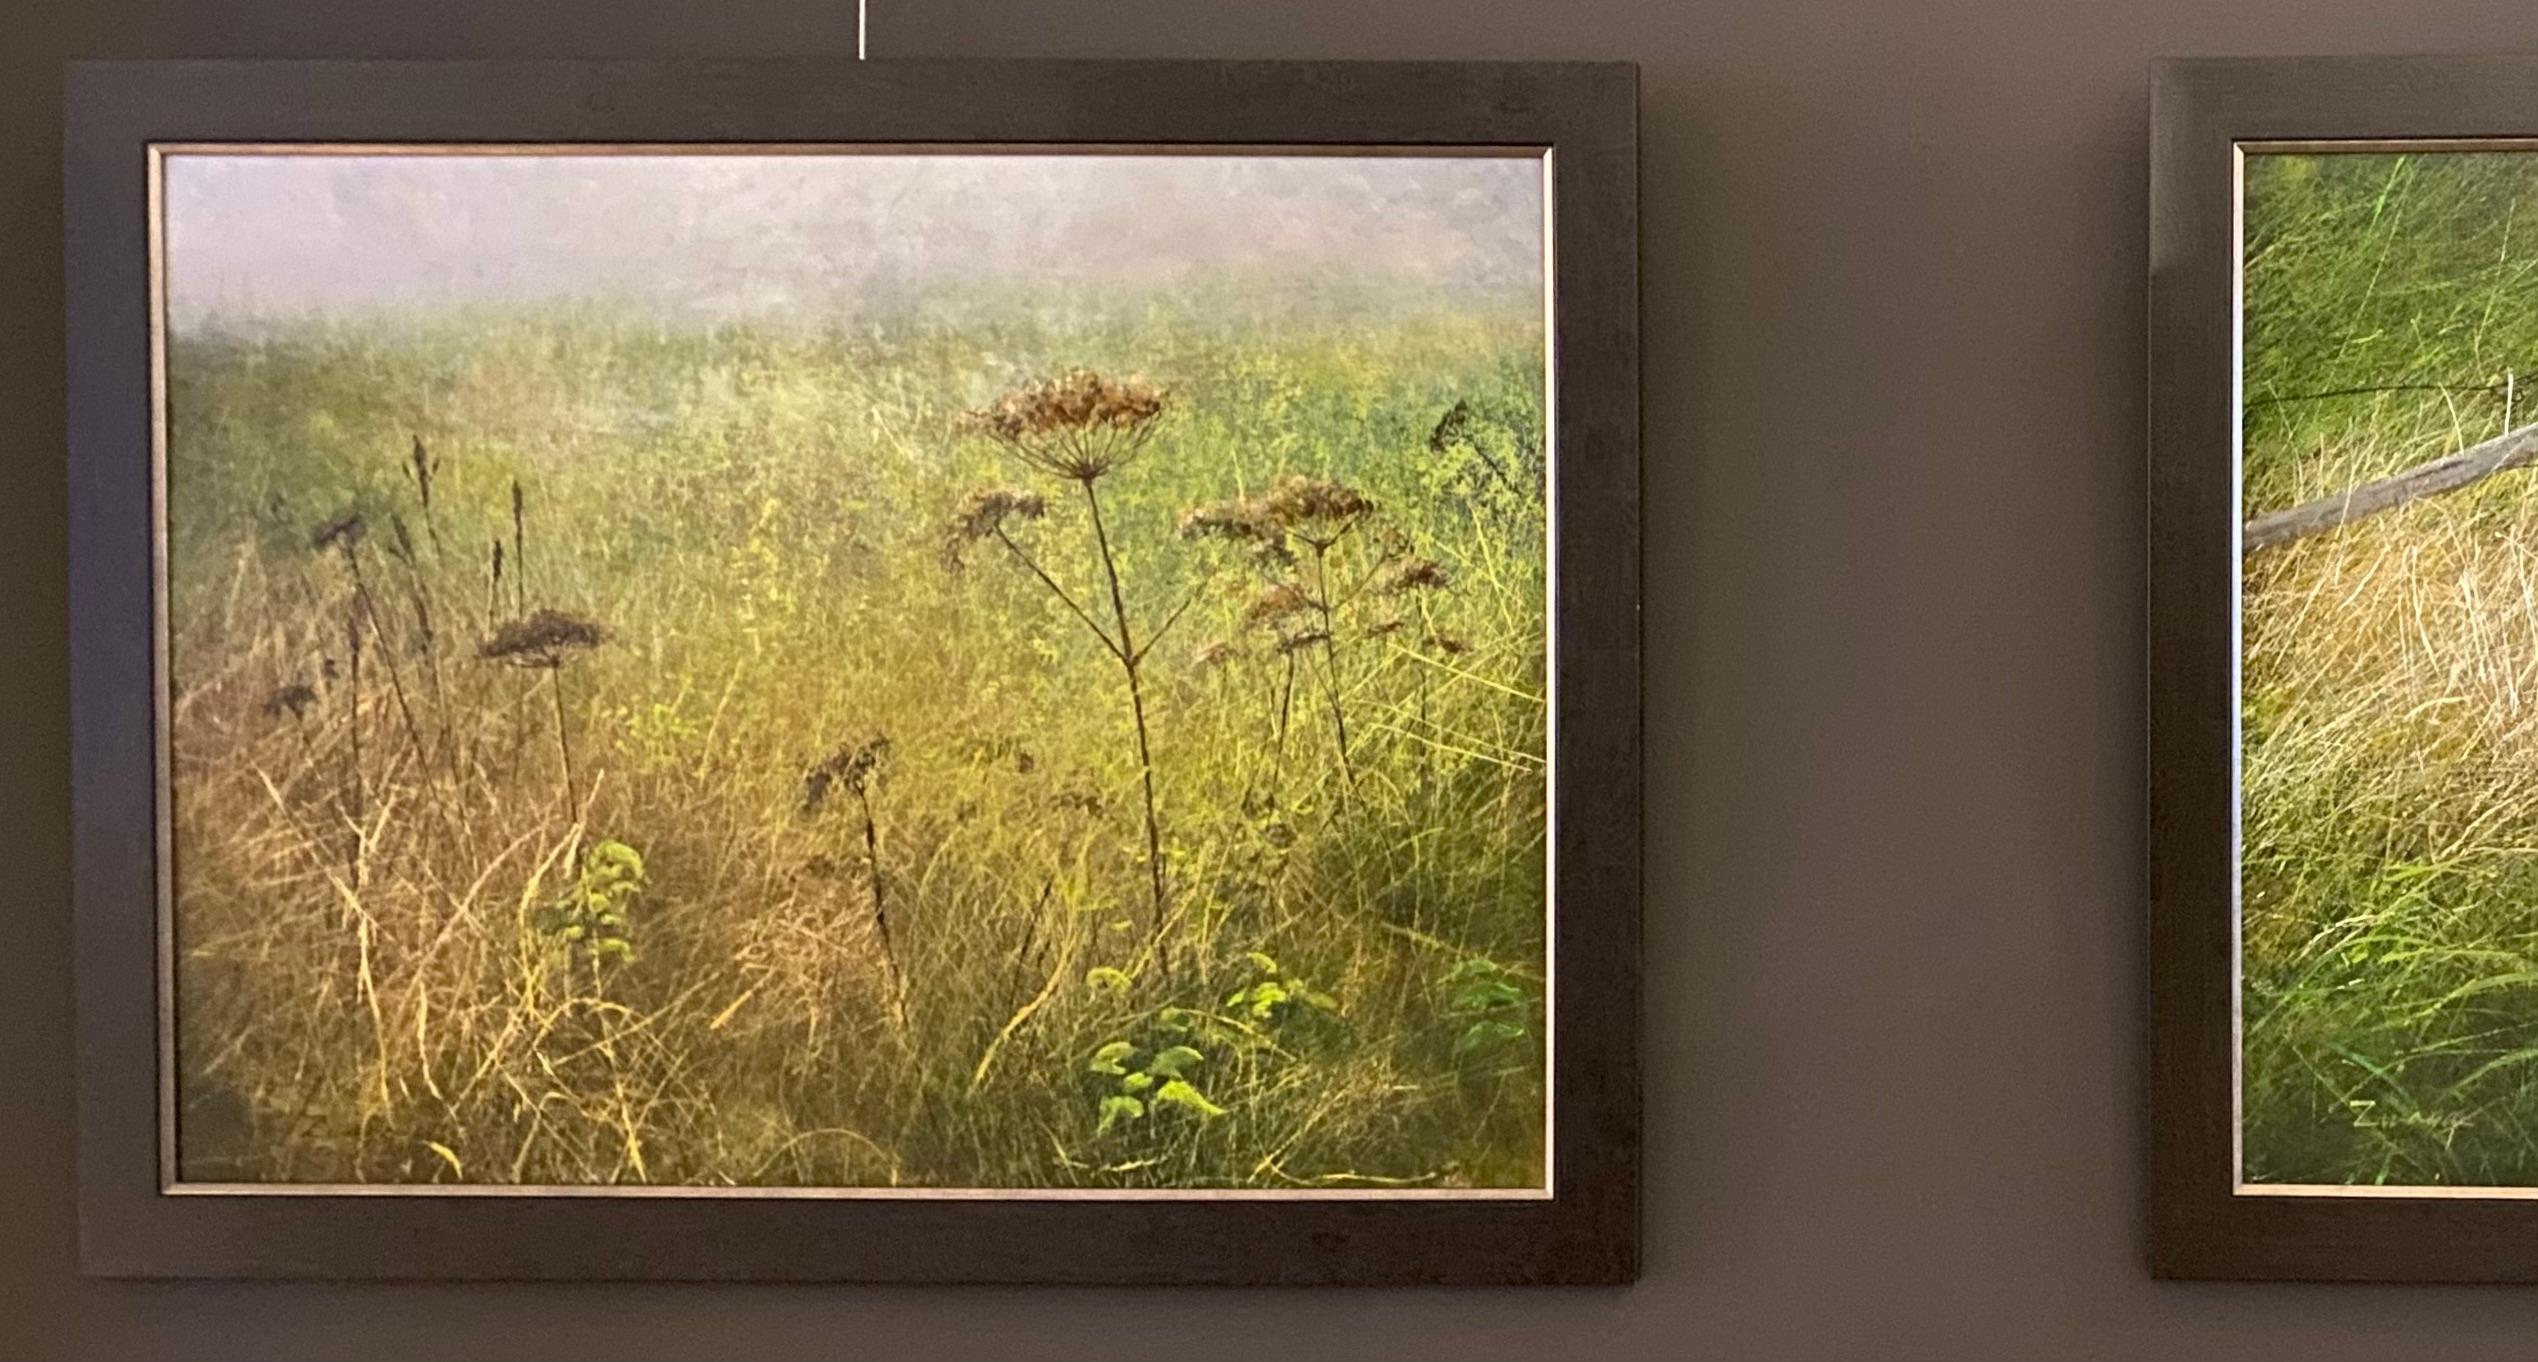 Heracleum- 21st Century Contemporary Landscape painting of  Fields with flowers - Brown Figurative Painting by Erik Zwaga